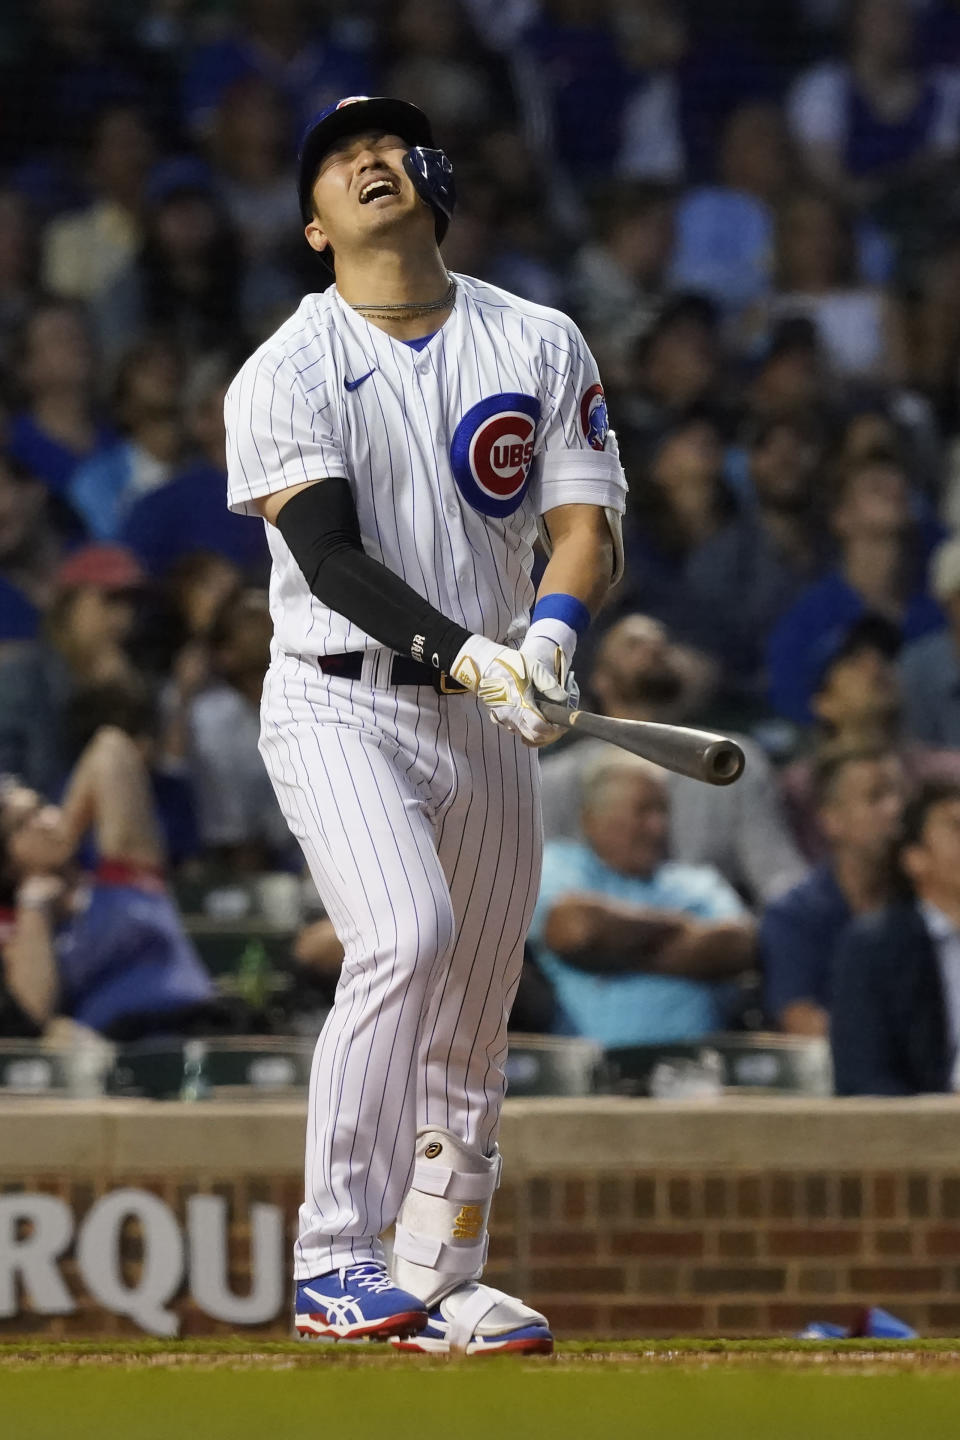 Chicago Cubs' Seiya Suzuki reacts to his infield pop up during the sixth inning of a baseball game against the Pittsburgh Pirates Monday, May 16, 2022, in Chicago. (AP Photo/Charles Rex Arbogast)